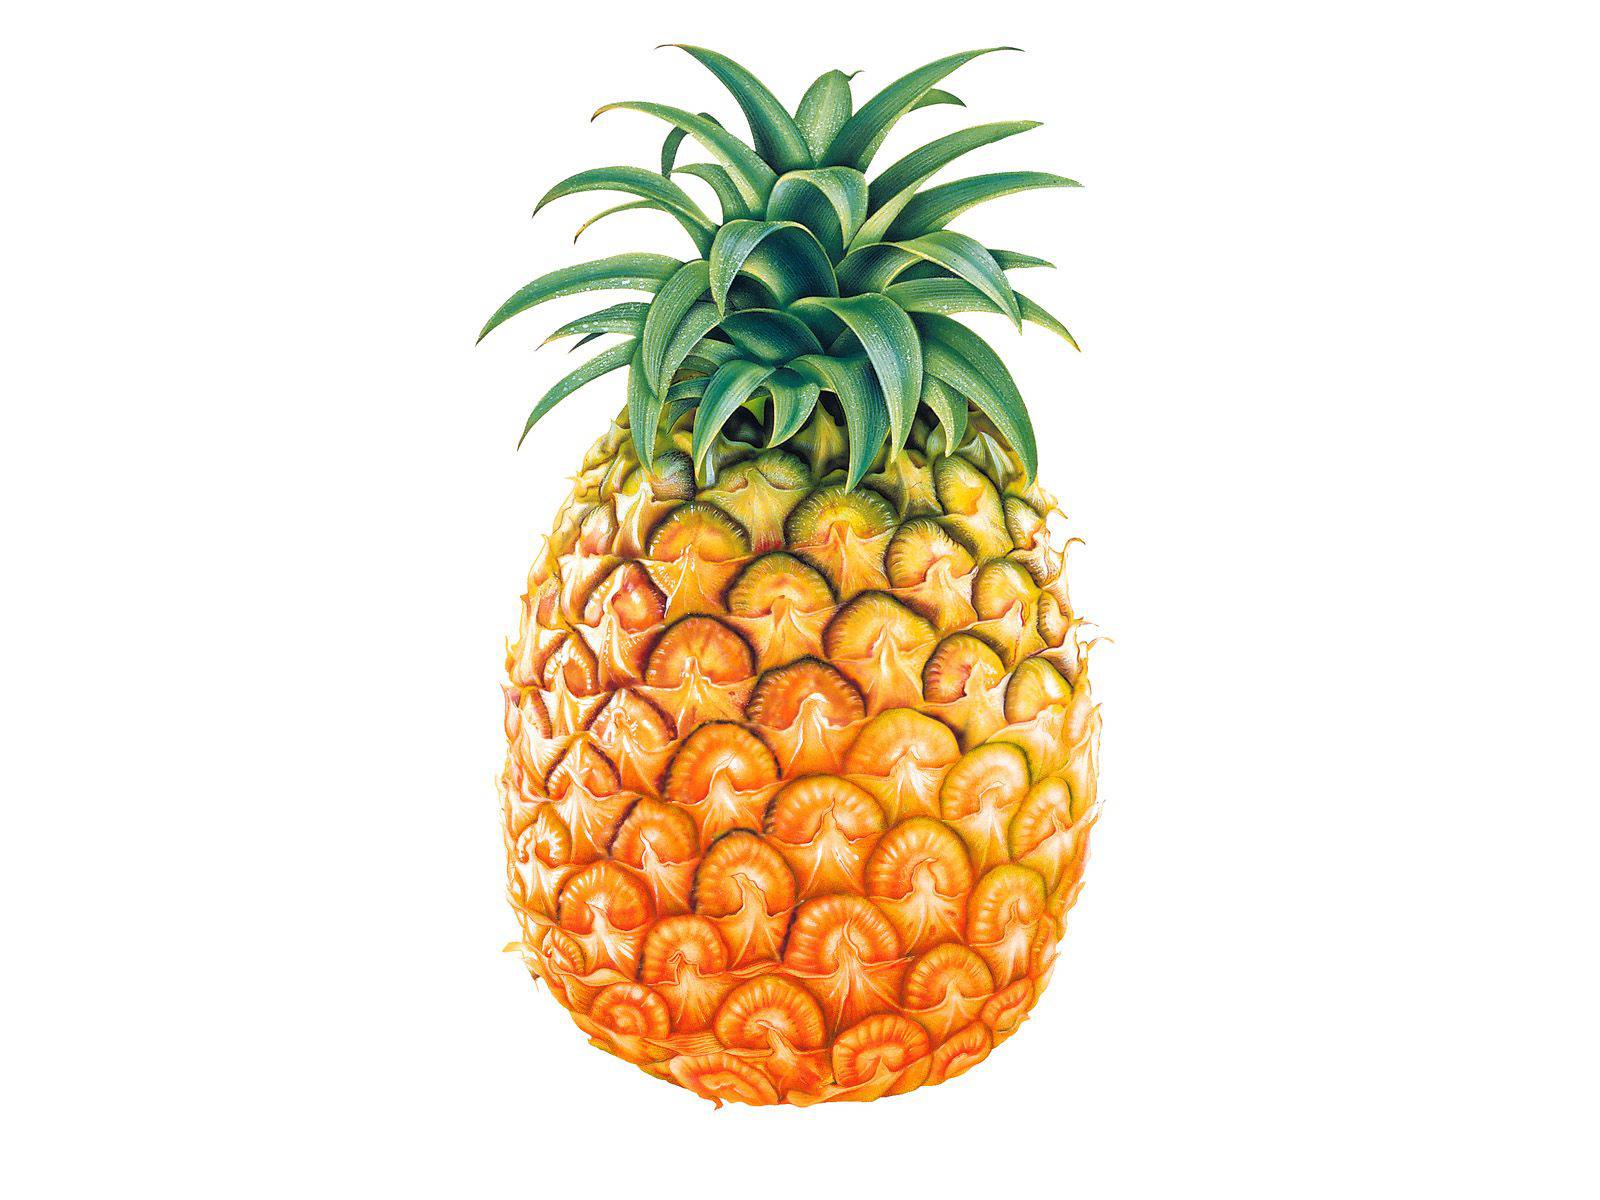 Pineapple wallpaper iphone free clipart images